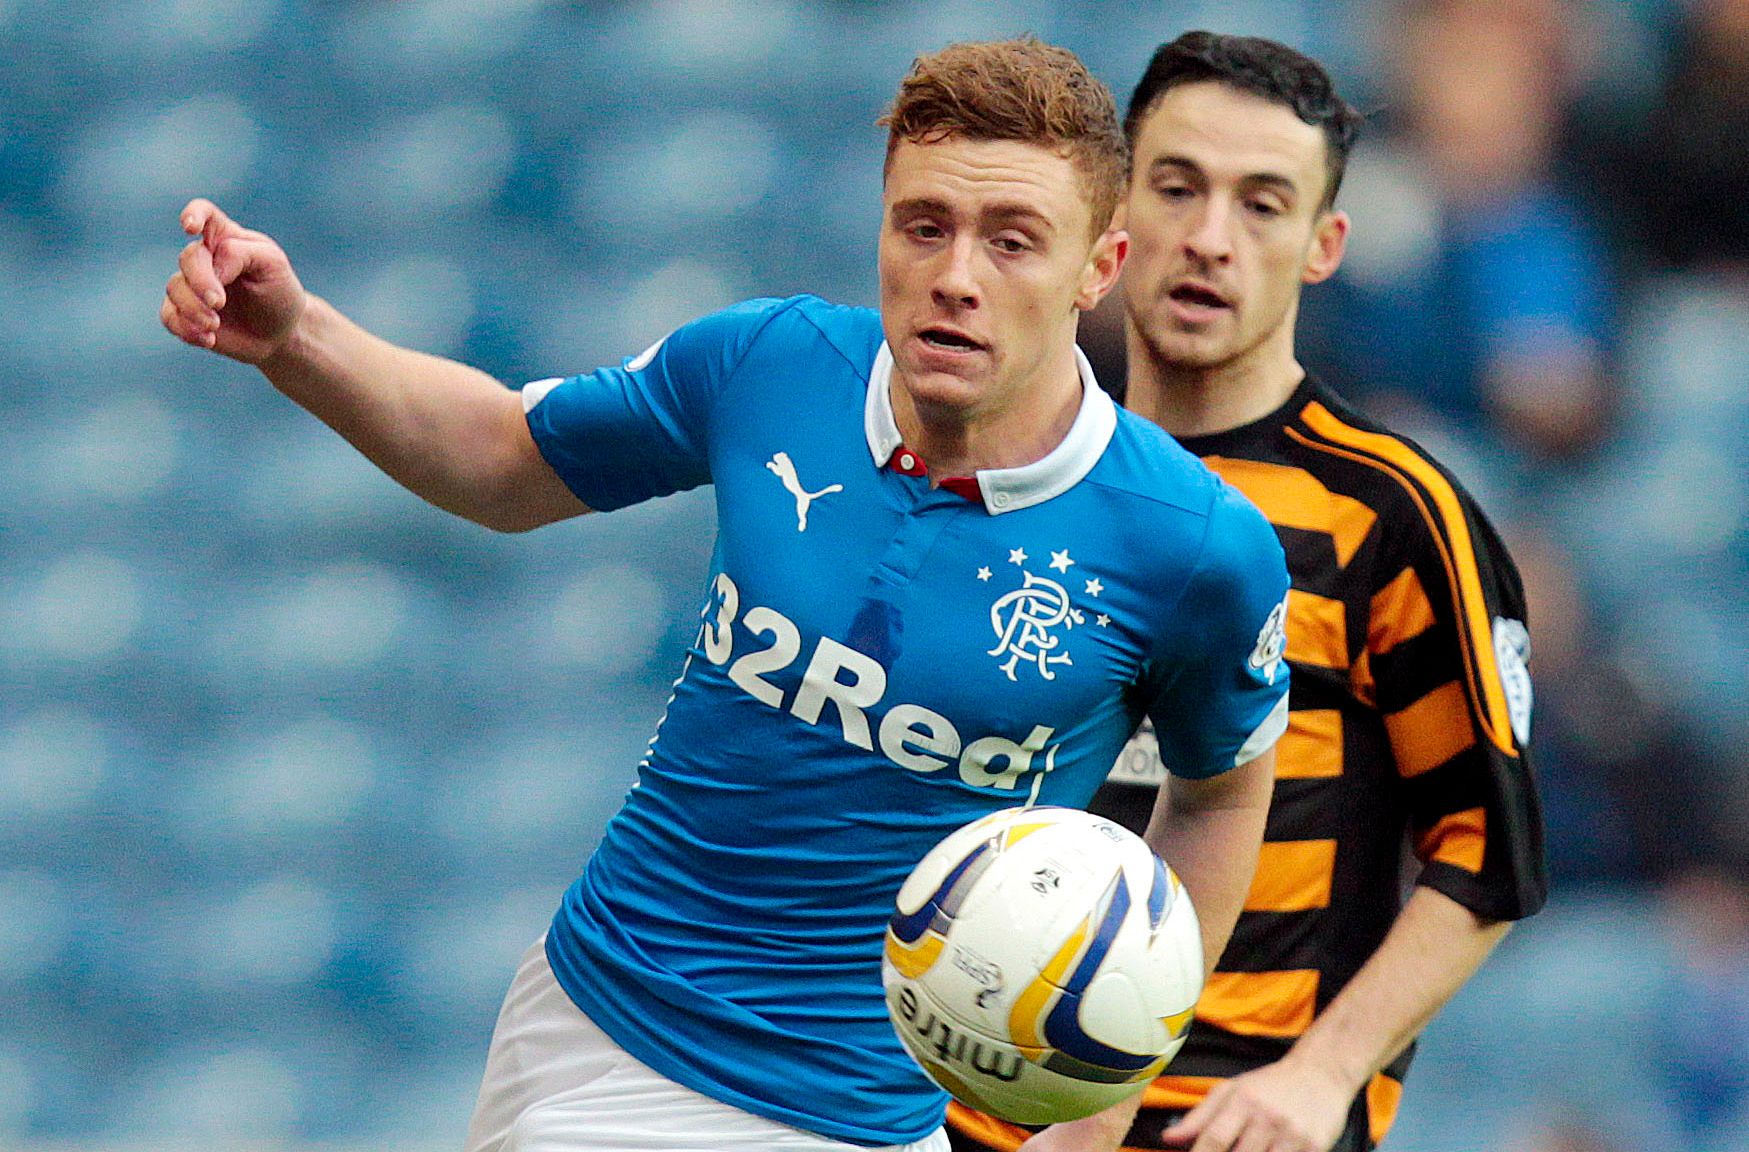 Football - Rangers v Alloa Athletic - Scottish Championship - Ibrox - 15/11/14 
Rangers' Lewis MacLeod (L) in action with Alloa Athletic's Kevin Cawley 
Mandatory Credit: Action Images / Graham Stuart 
Livepic 
EDITORIAL USE ONLY.